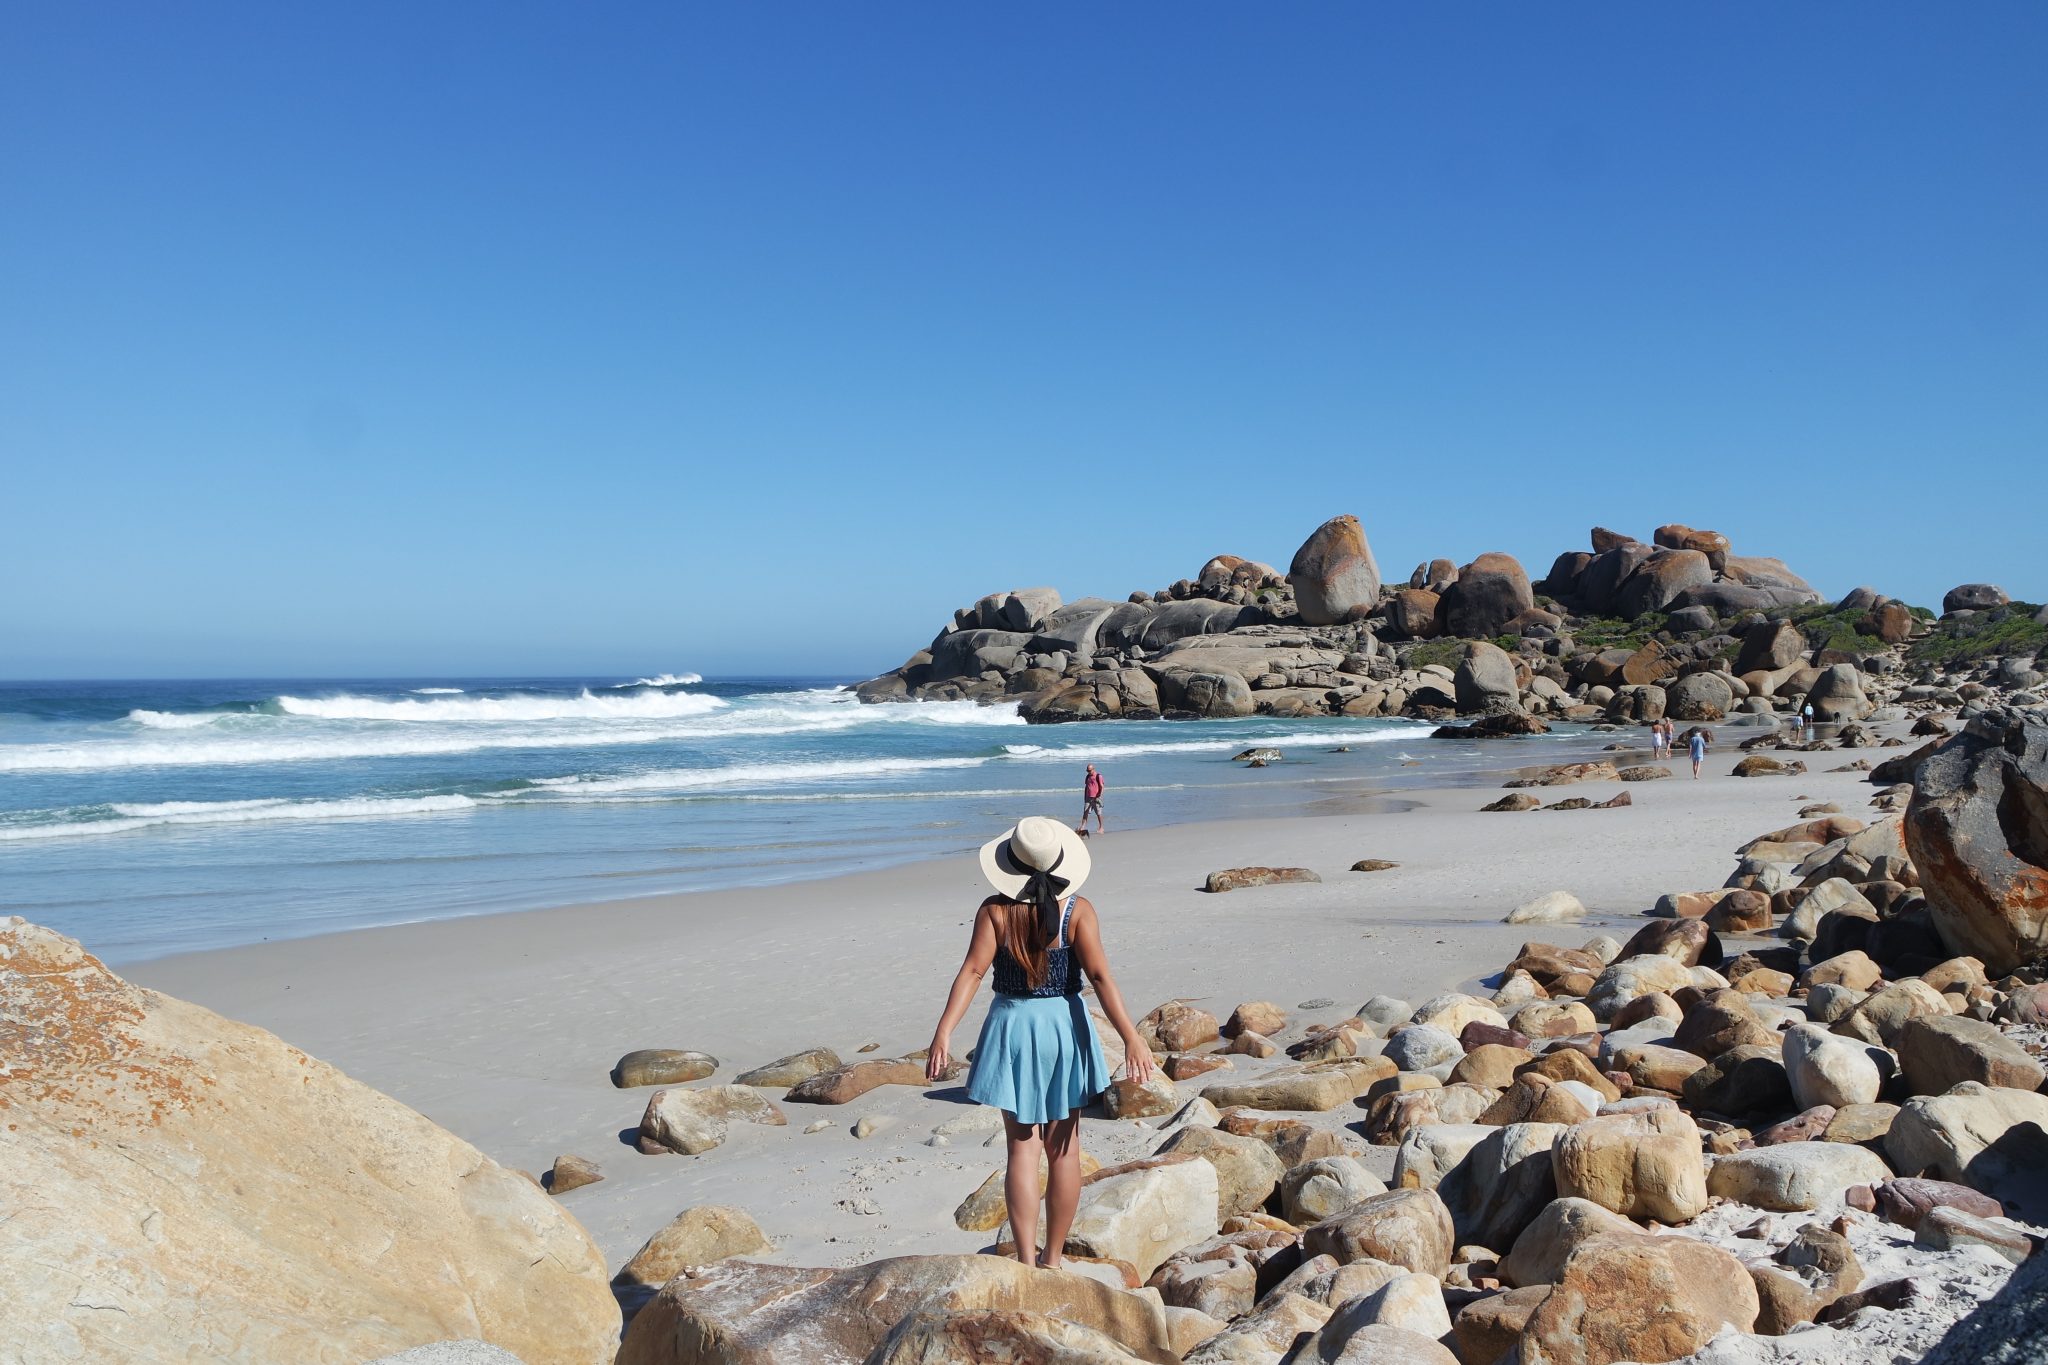 Llandudno Beach could be your next favorite unspoiled beach in Cape Town